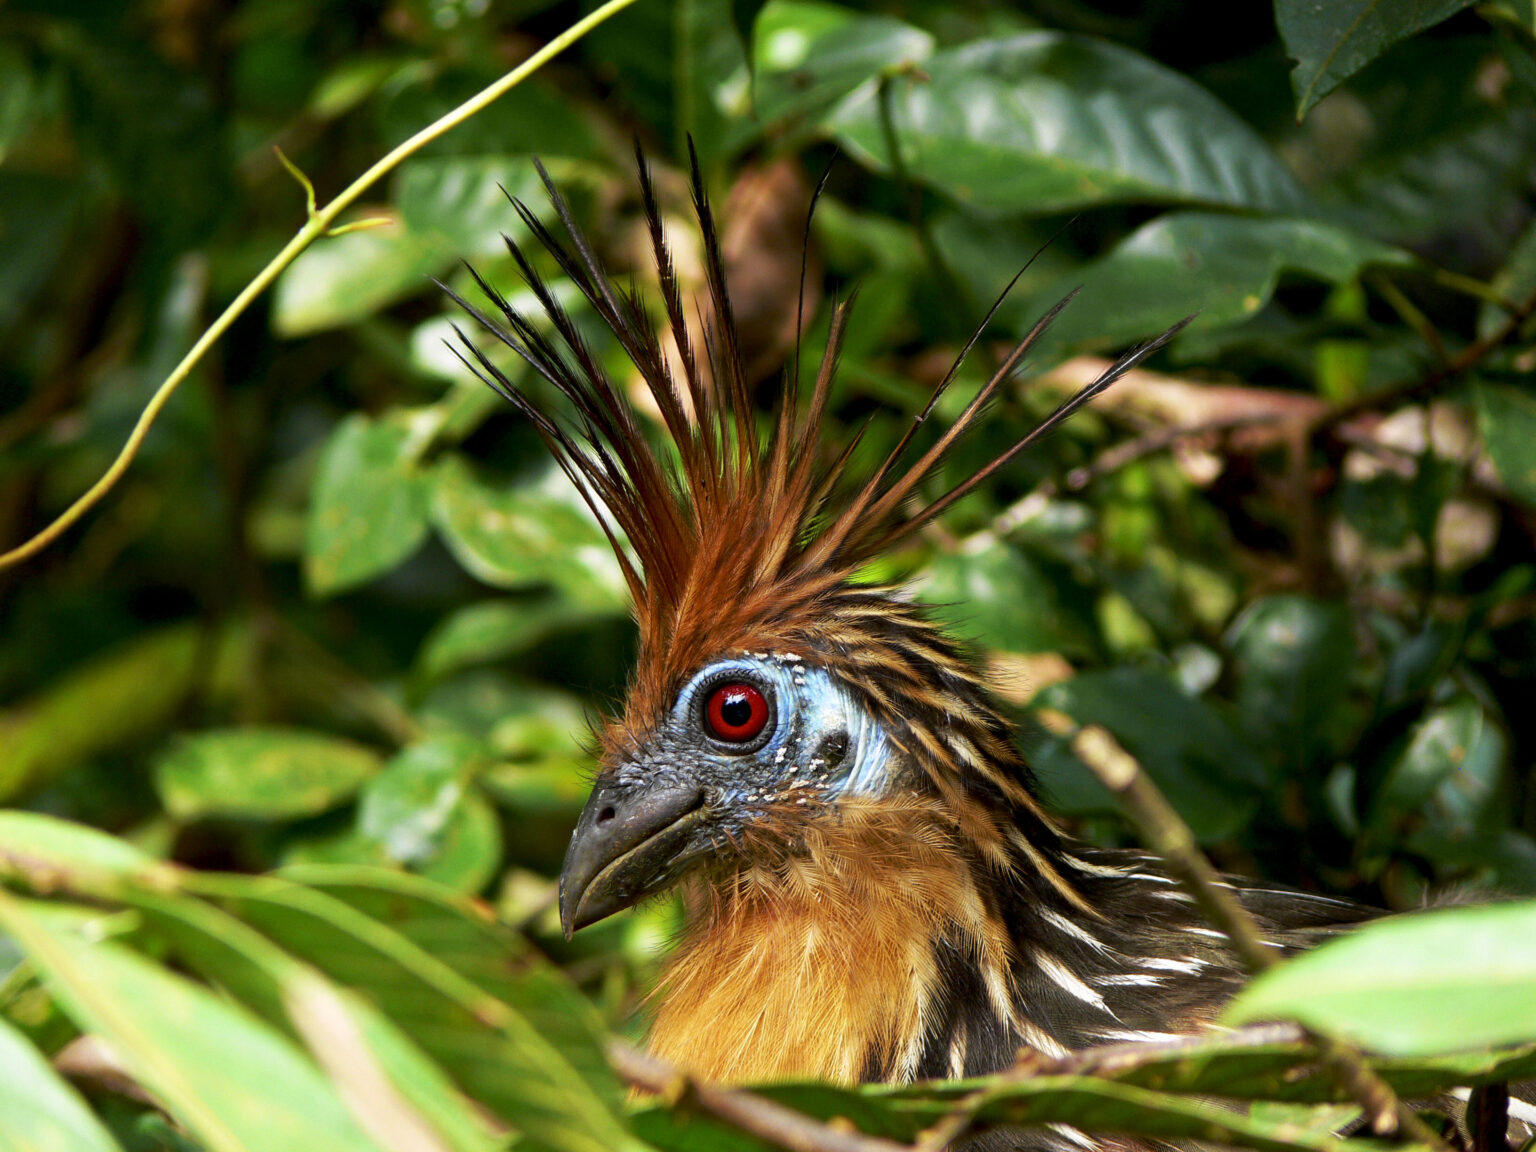 Bird with large feathers sitting among trees